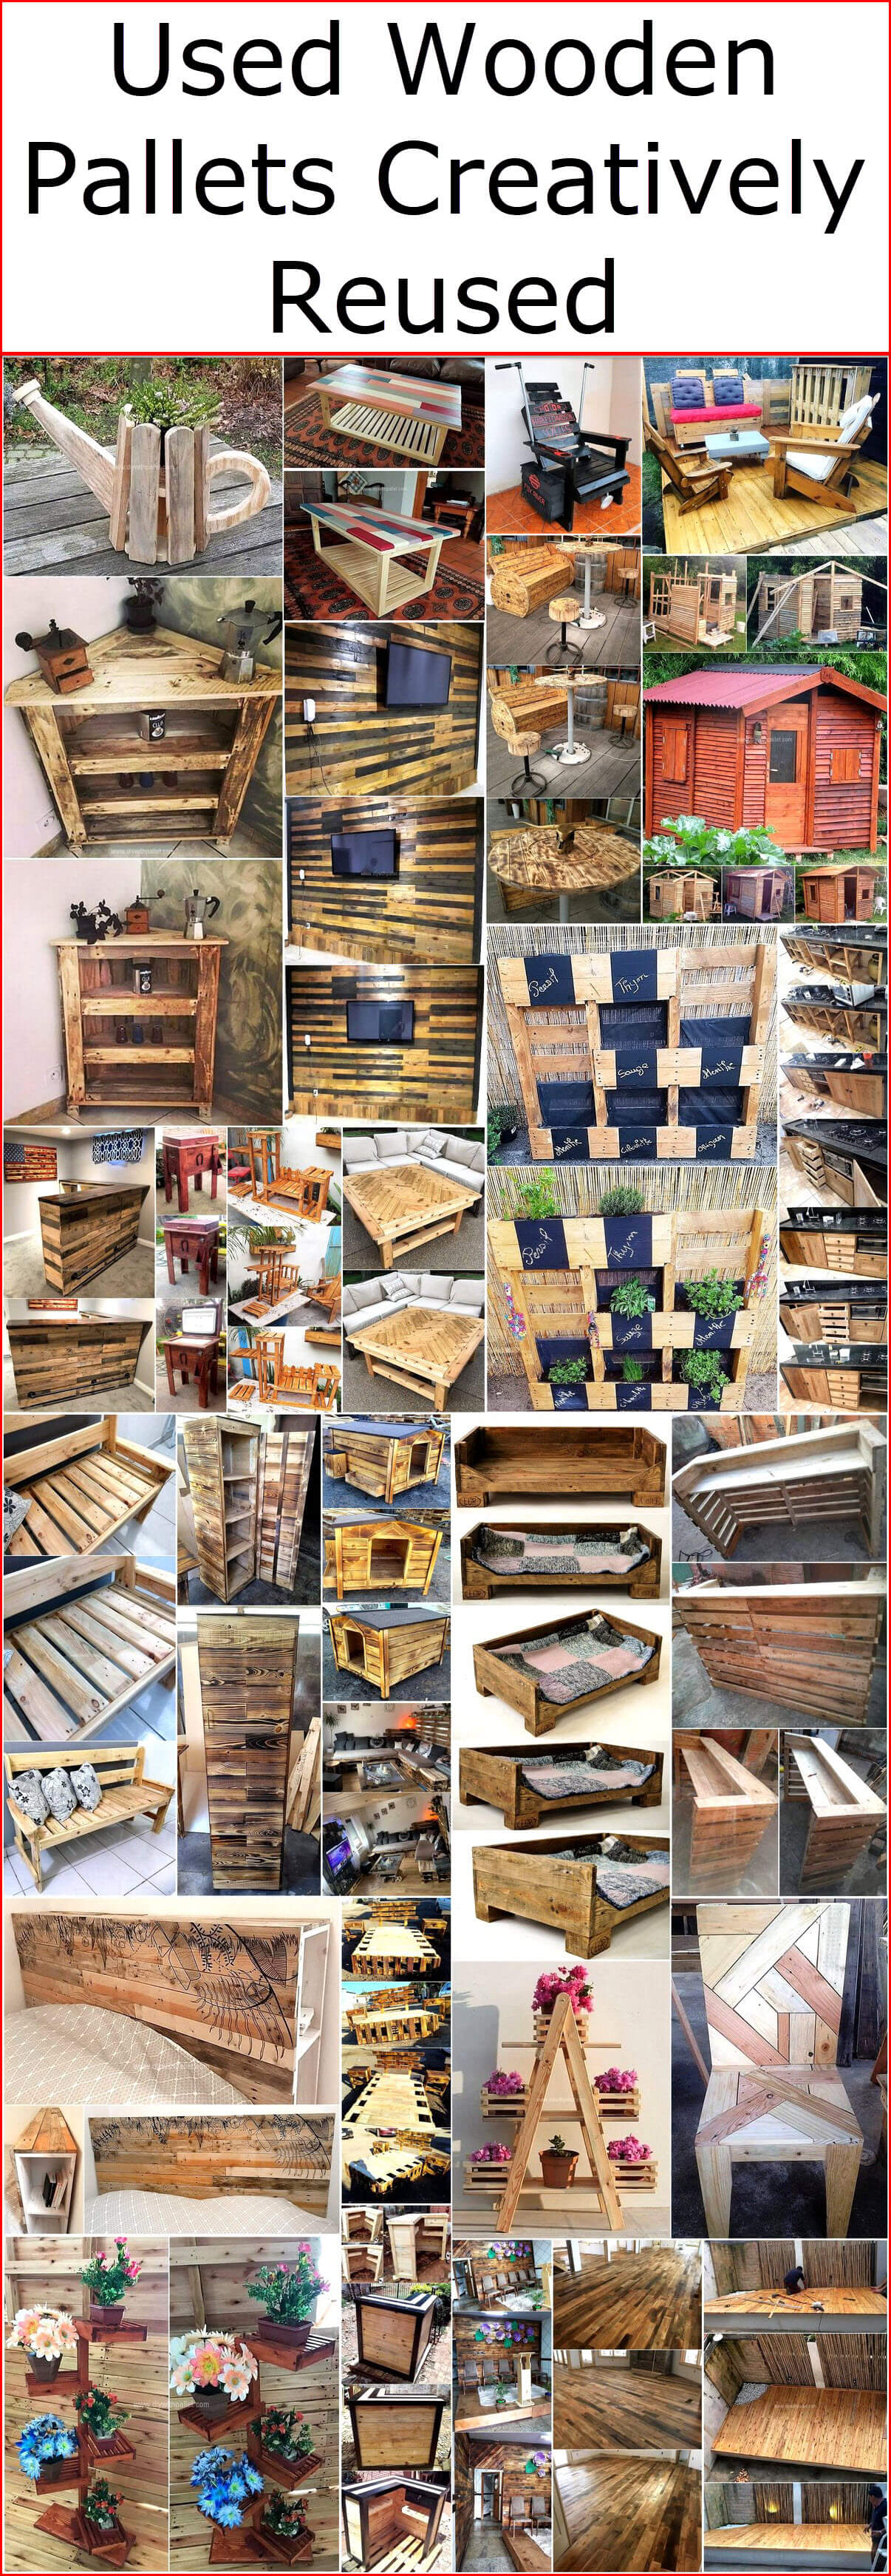 Used Wooden Pallets Creatively Reused